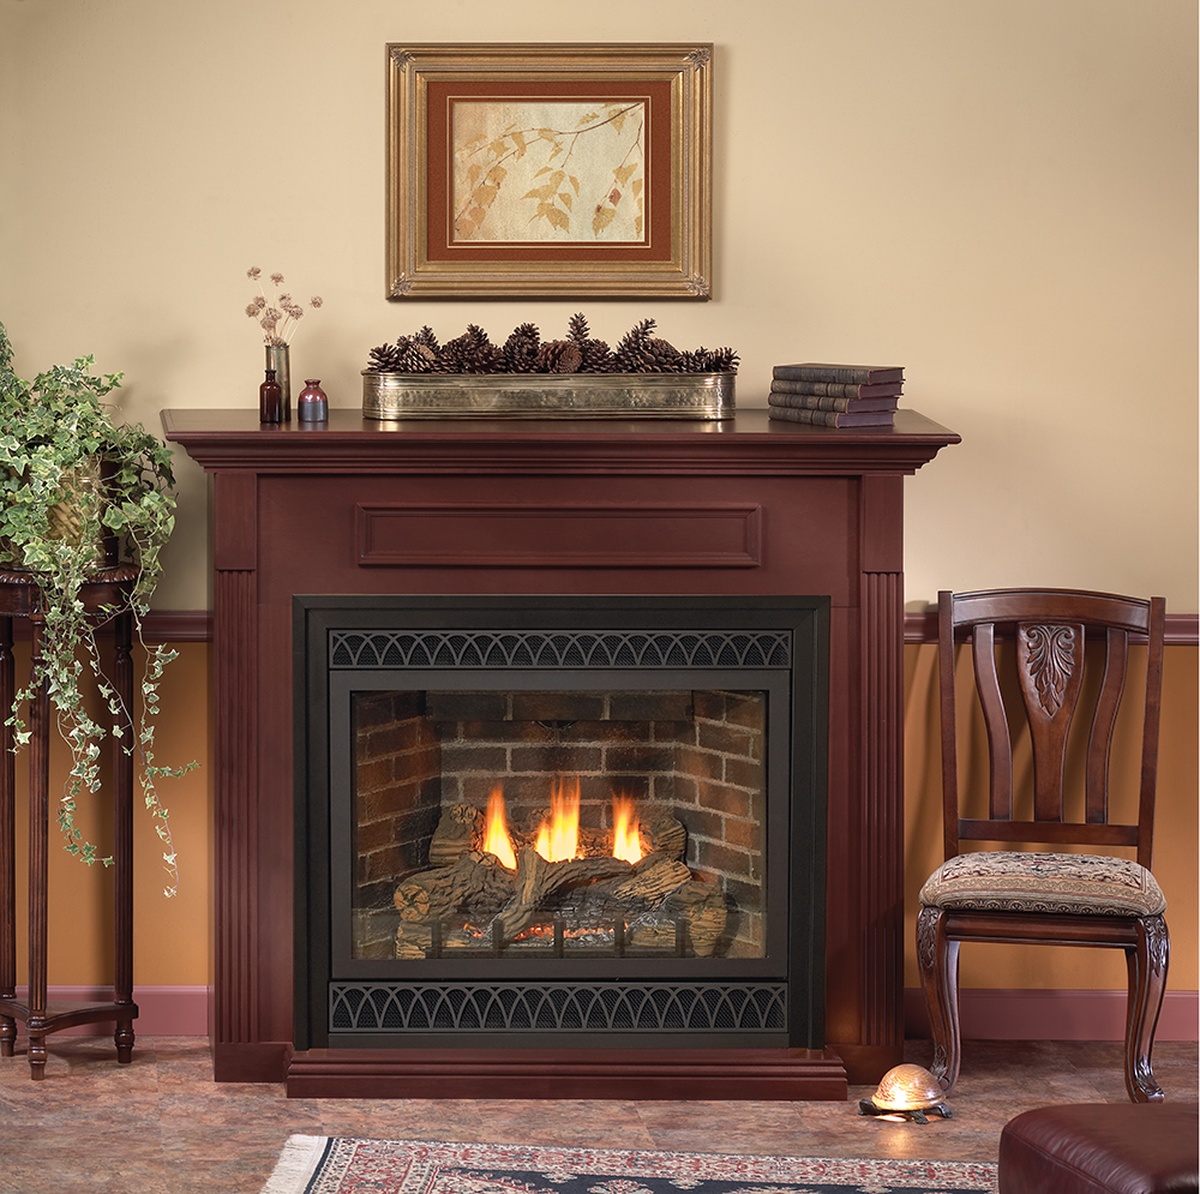 Fireplace Images Fresh Empire Tahoe Deluxe 36 Fireplace Catalog